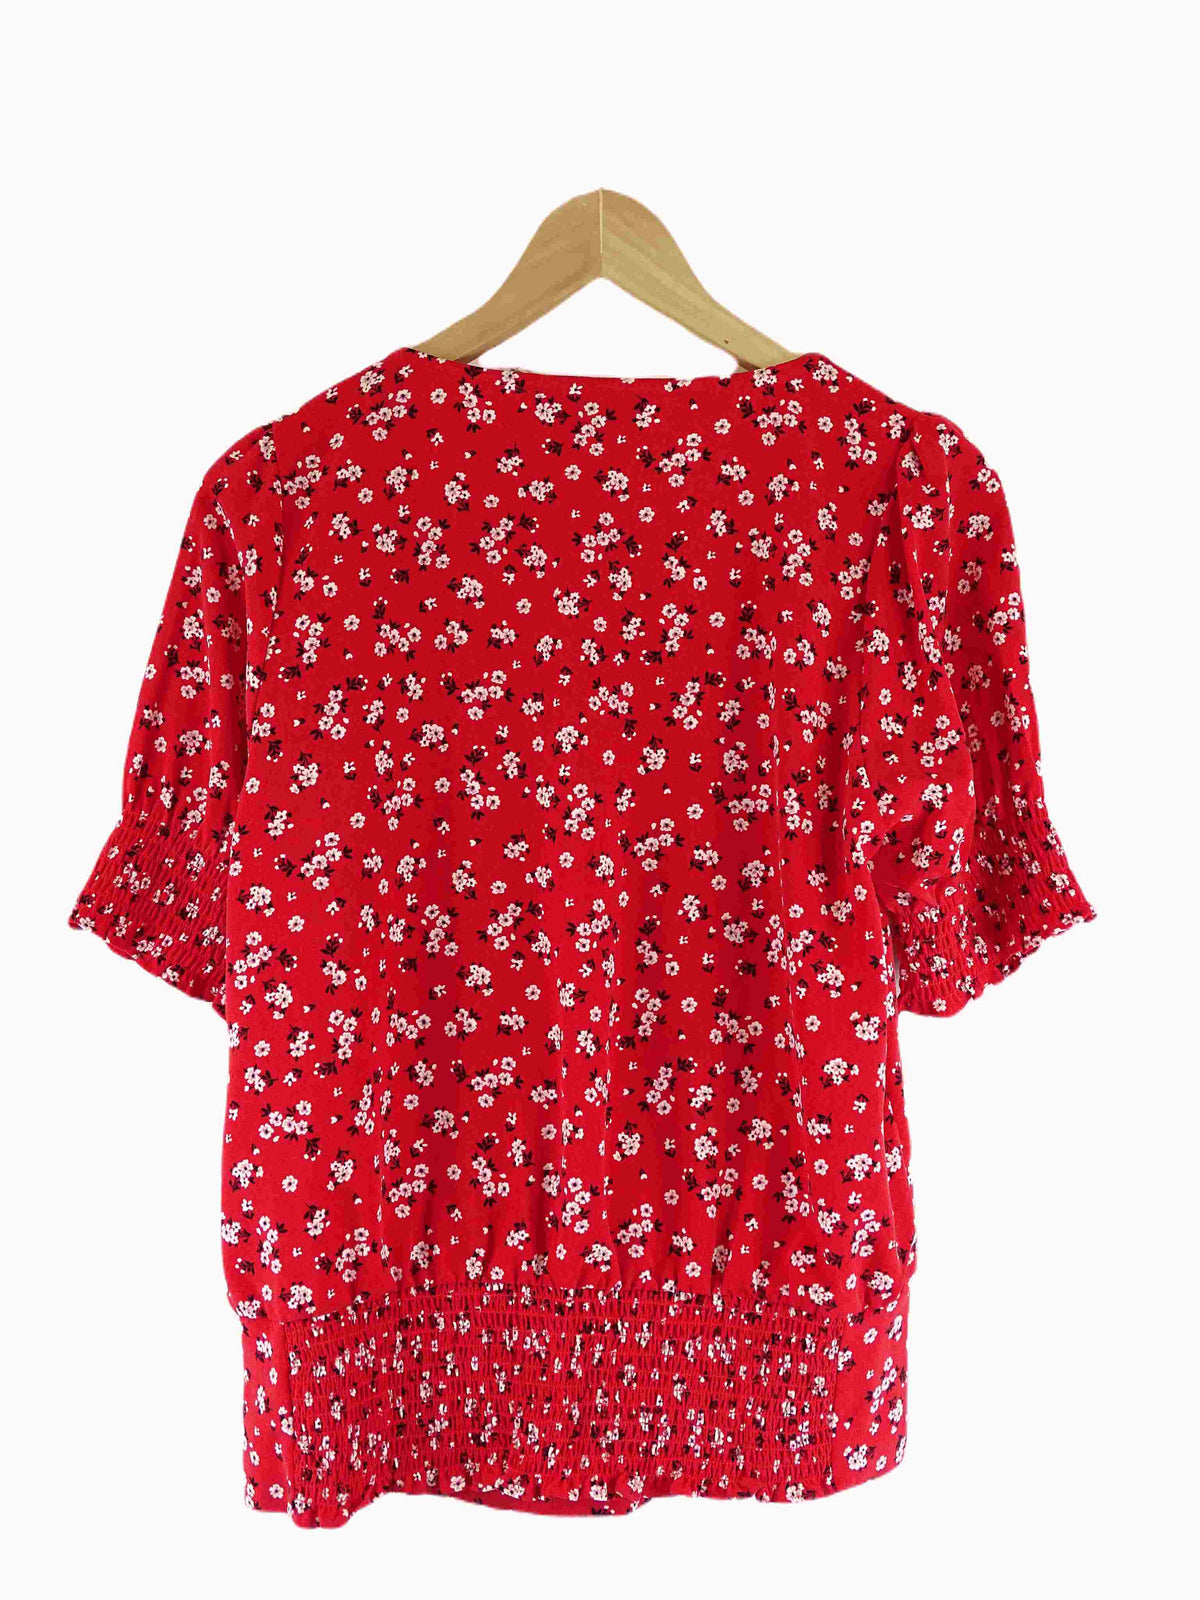 Karl Lagerfeld Red Floral Top S